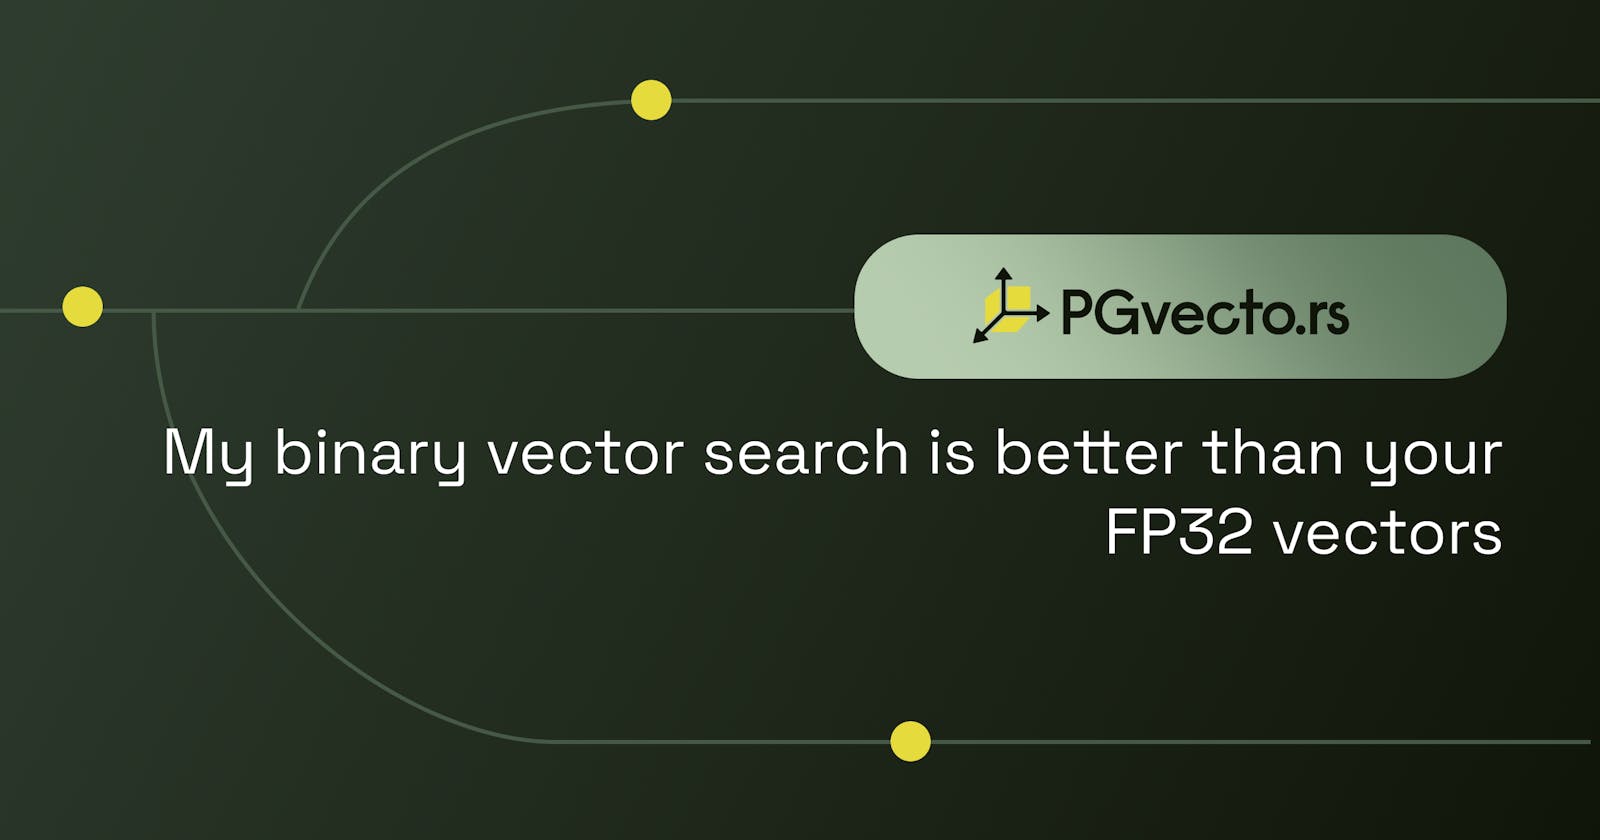 My binary vector search is better than your FP32 vectors